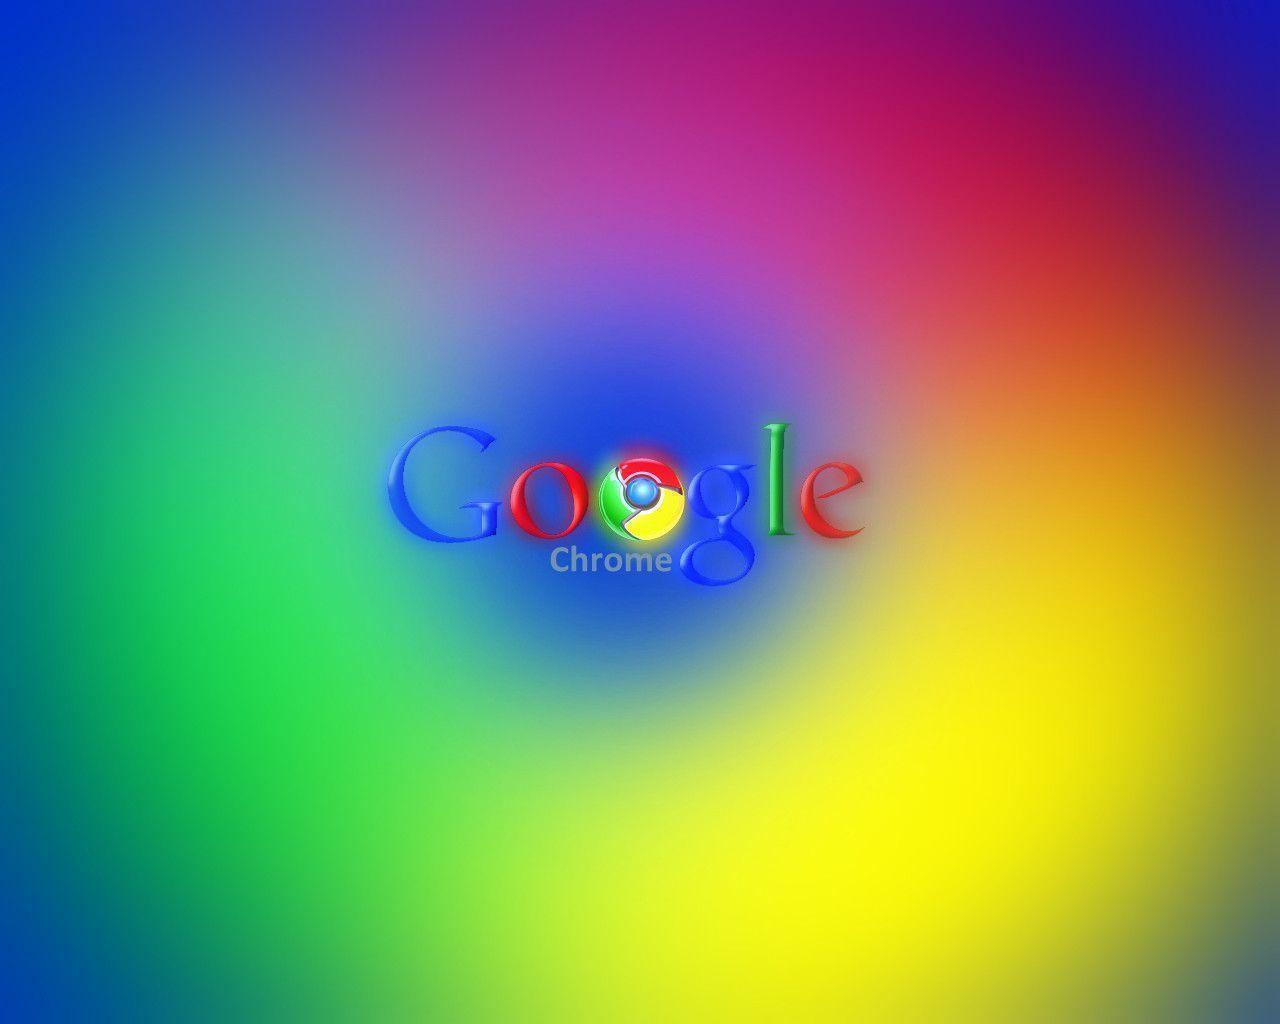 Google Chrome Wallpaper Photo 26989 HD Picture. Top Background Free